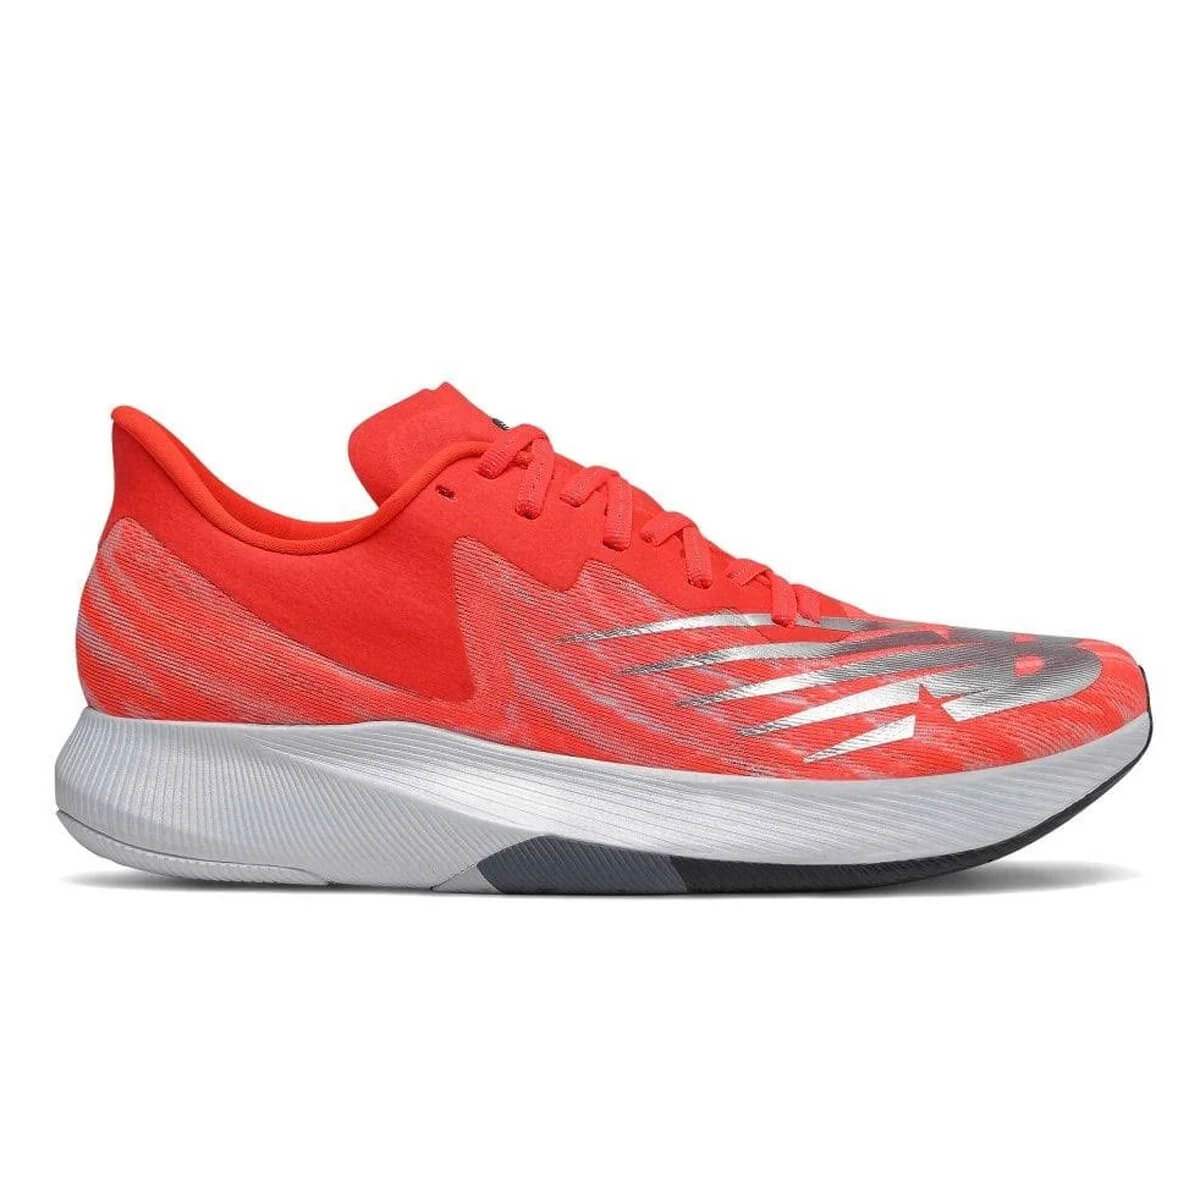 New Balance Fuel Cell Tc Womens | Vivid Coral - Pink